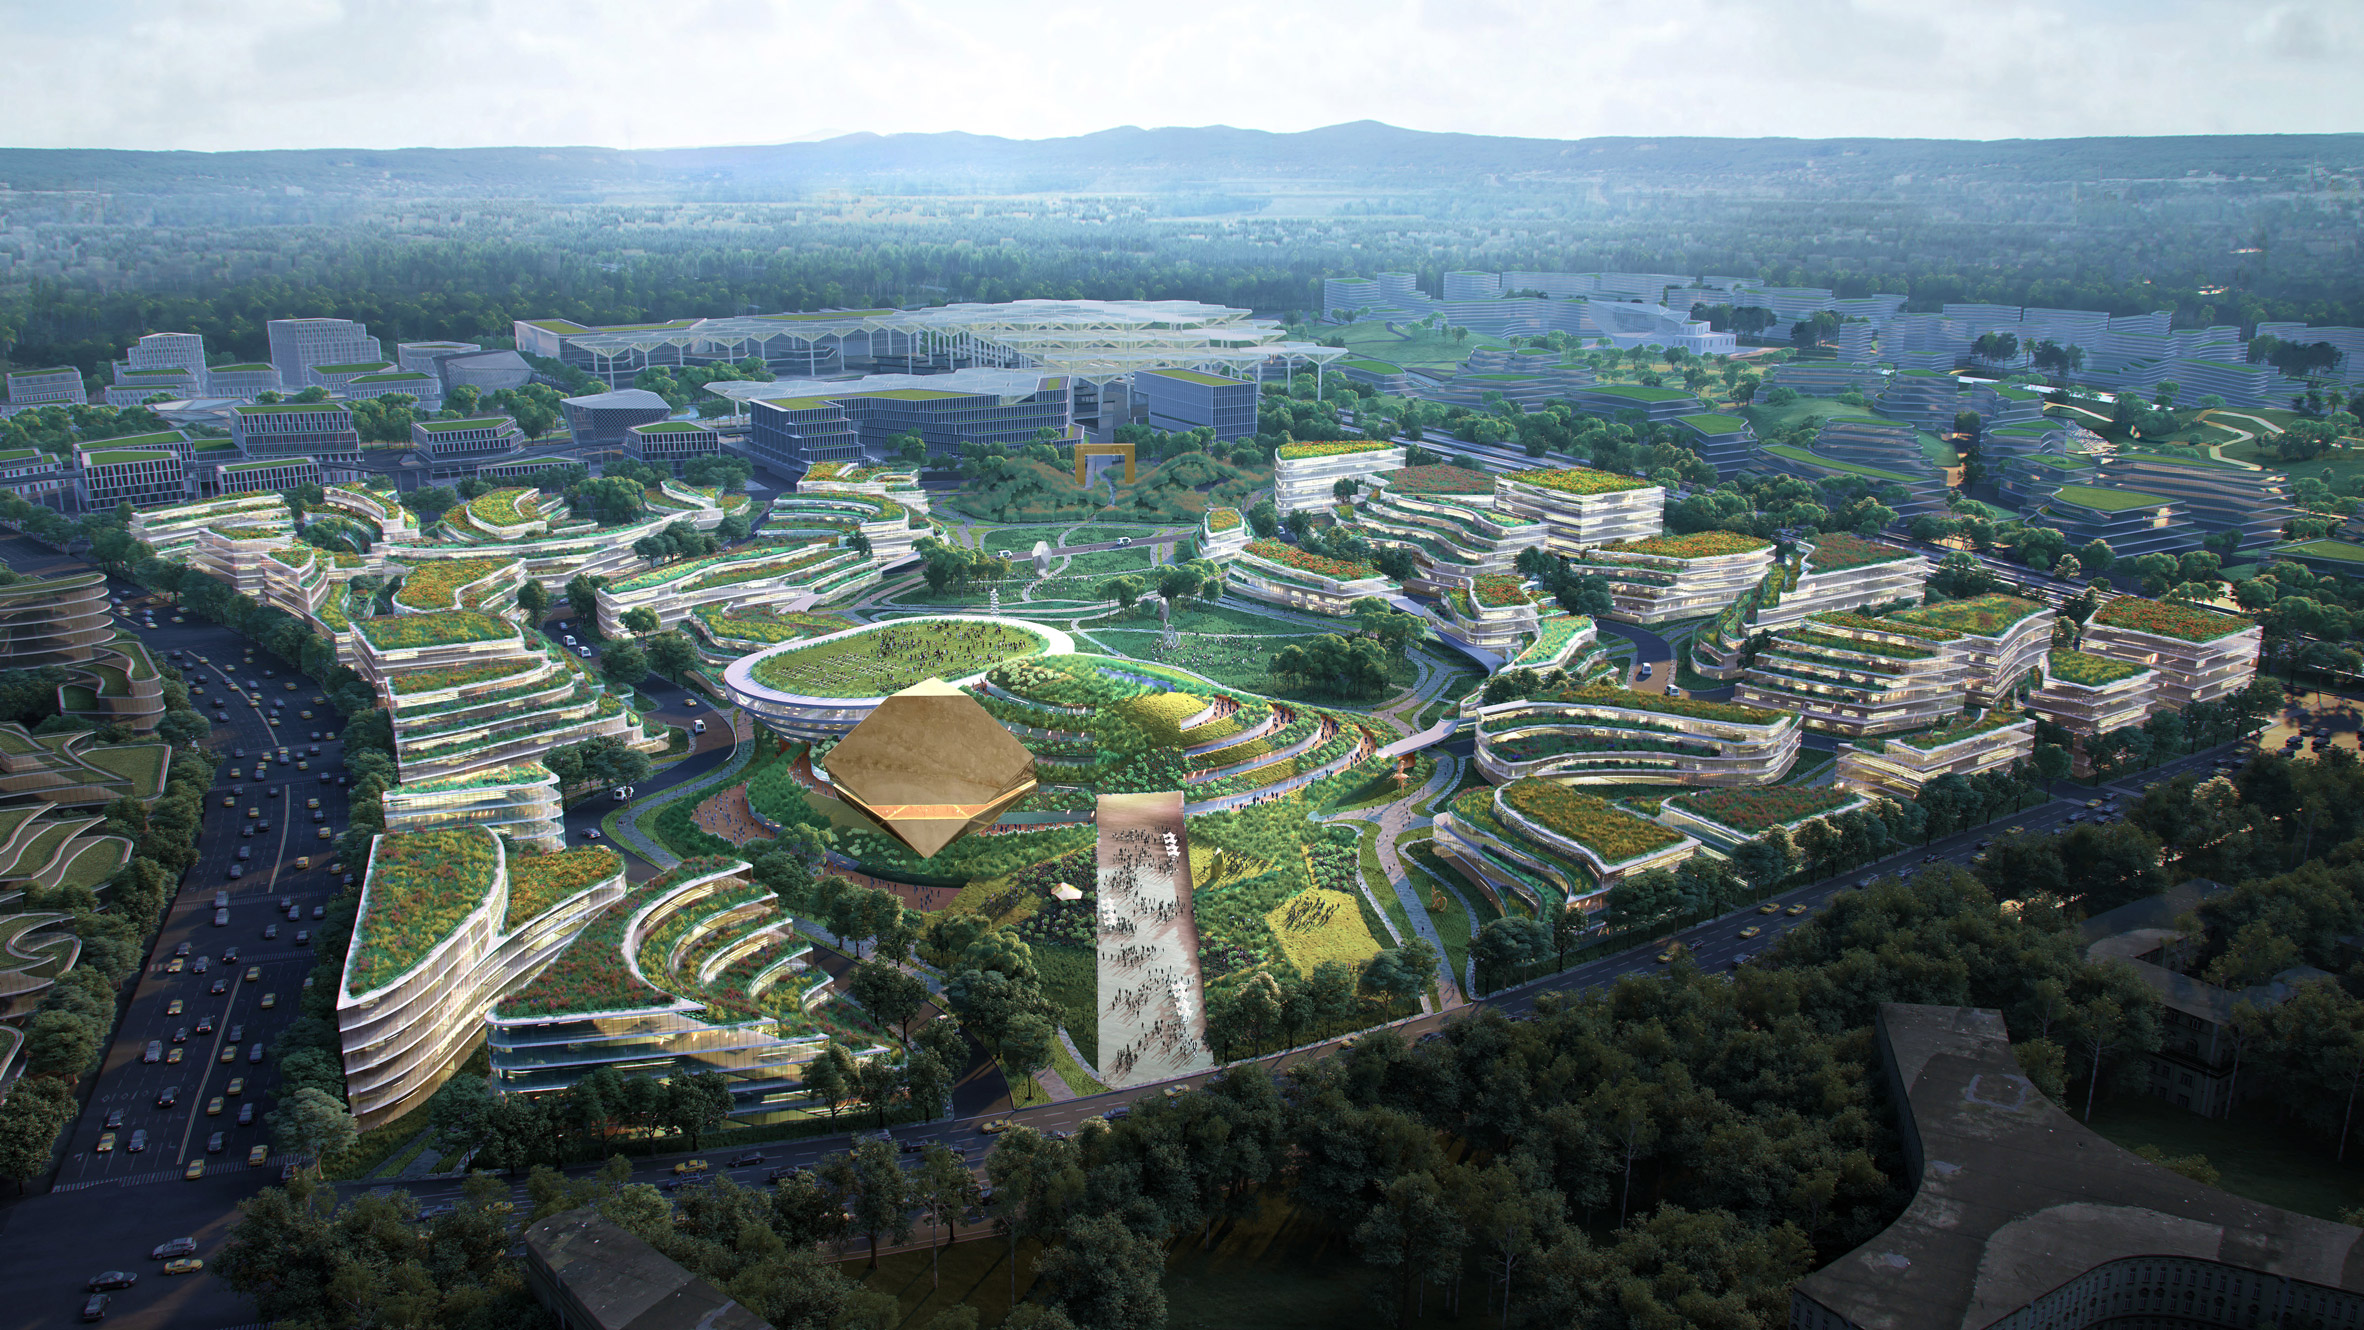 A cluster of green-roofed buildings within a masterplan by OMA